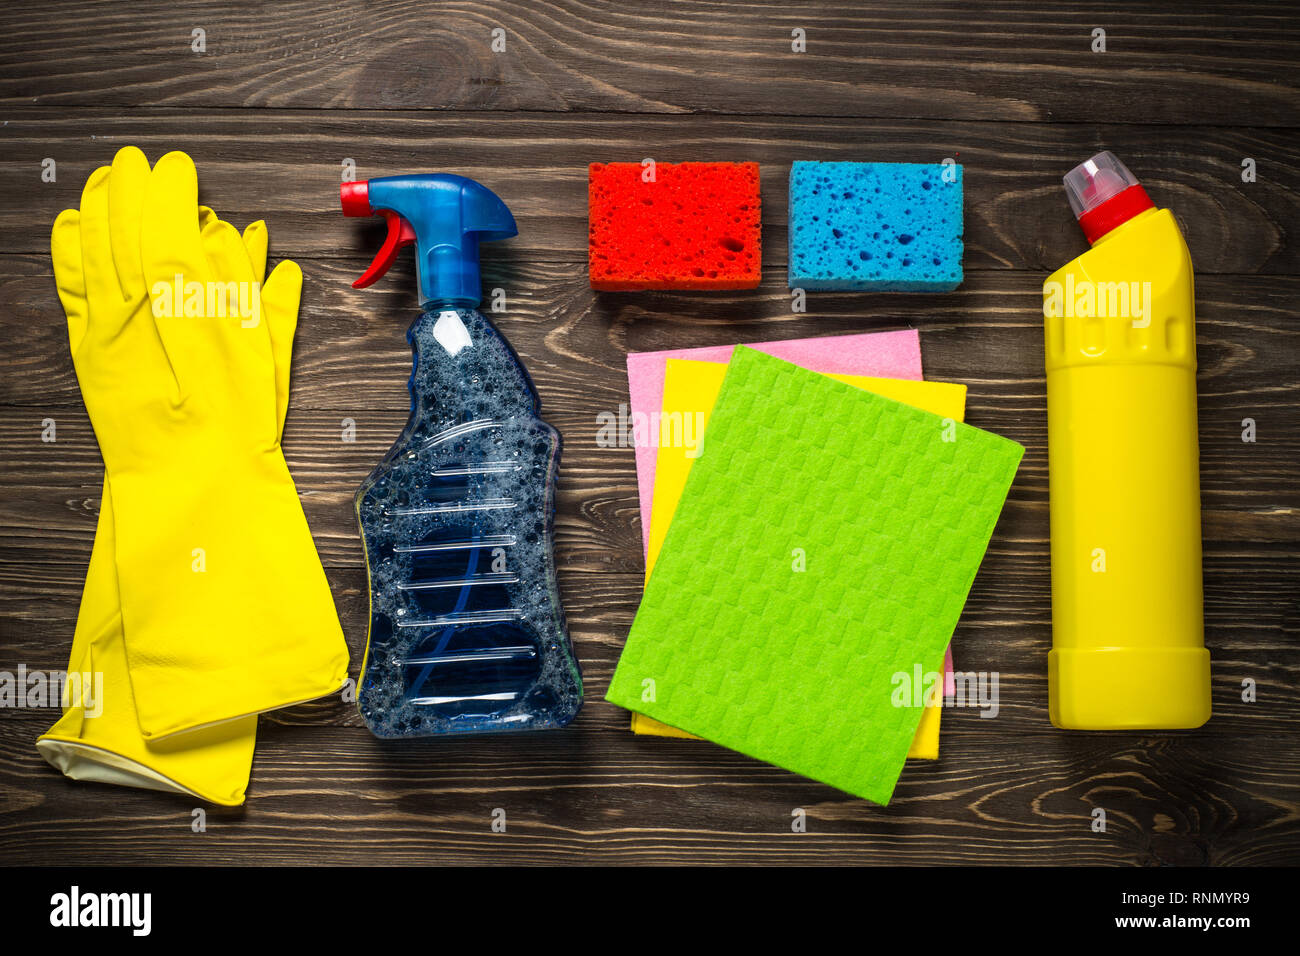 Cleaning product, household wooden table top view. Stock Photo